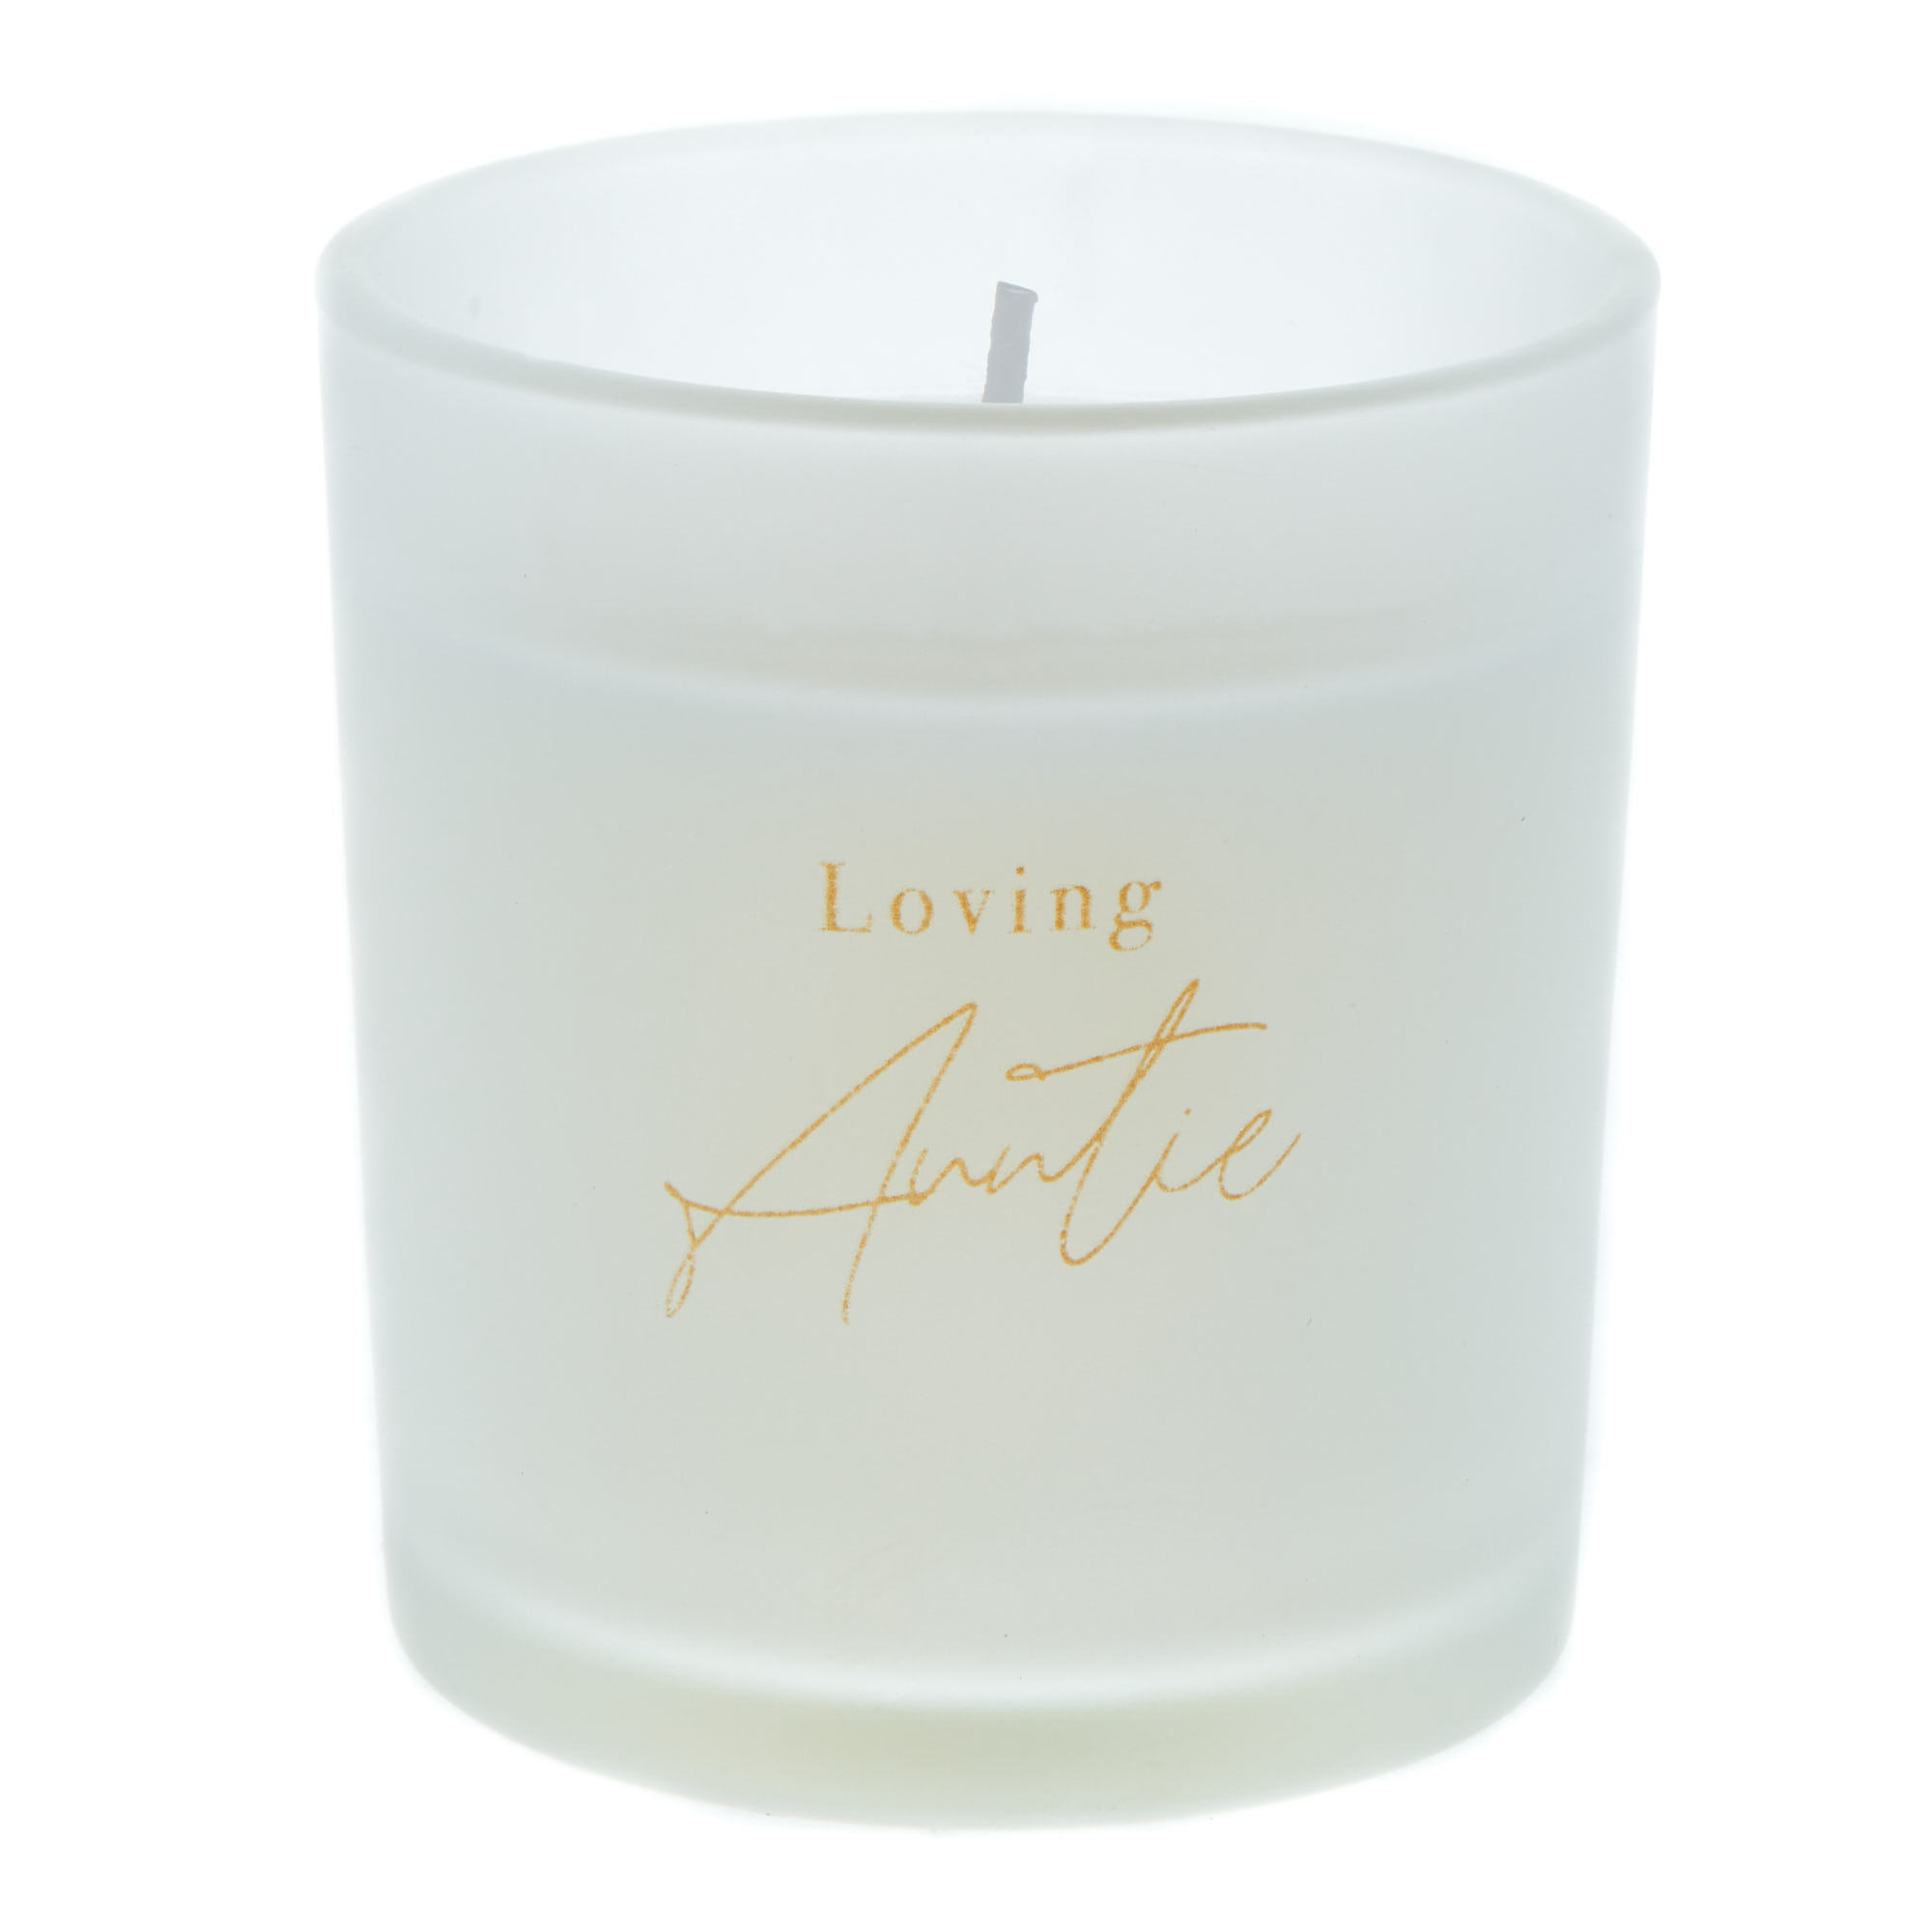 Loving Auntie Warm Cashmere Scented Candle 